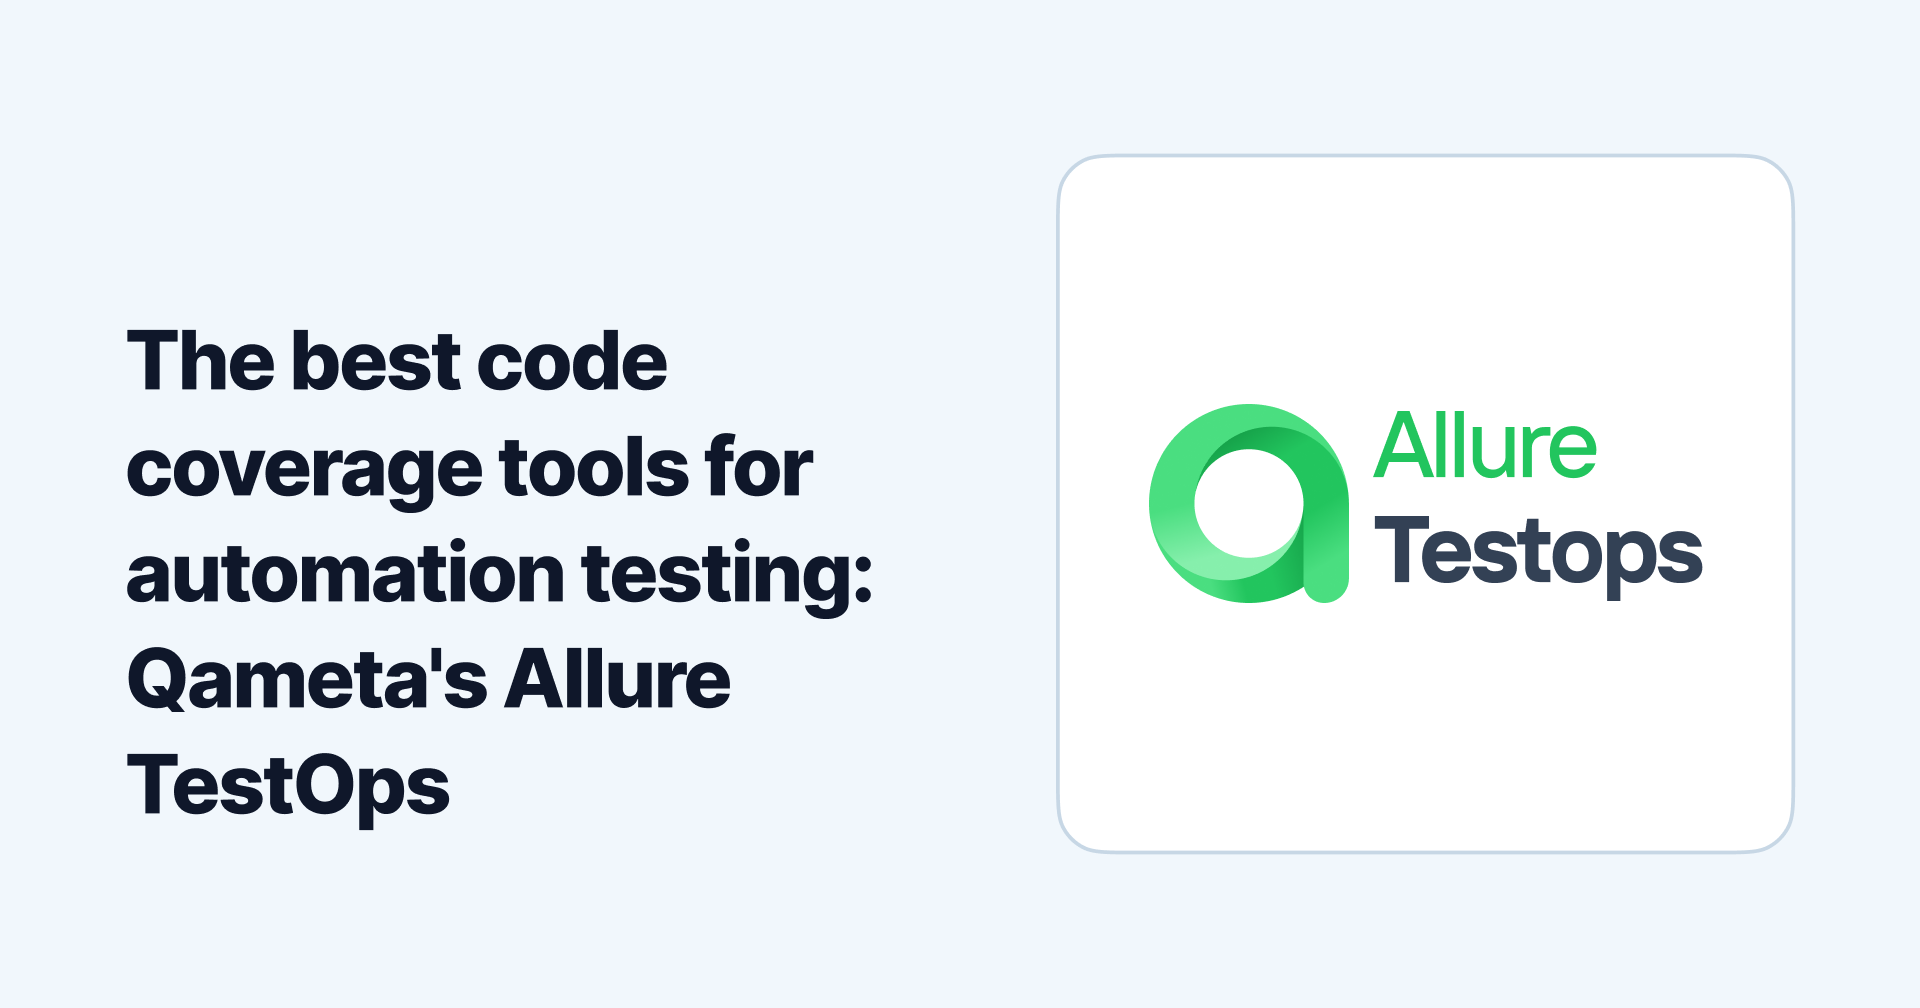 The best code coverage tools for automation testing: Qameta's Allure TestOps.